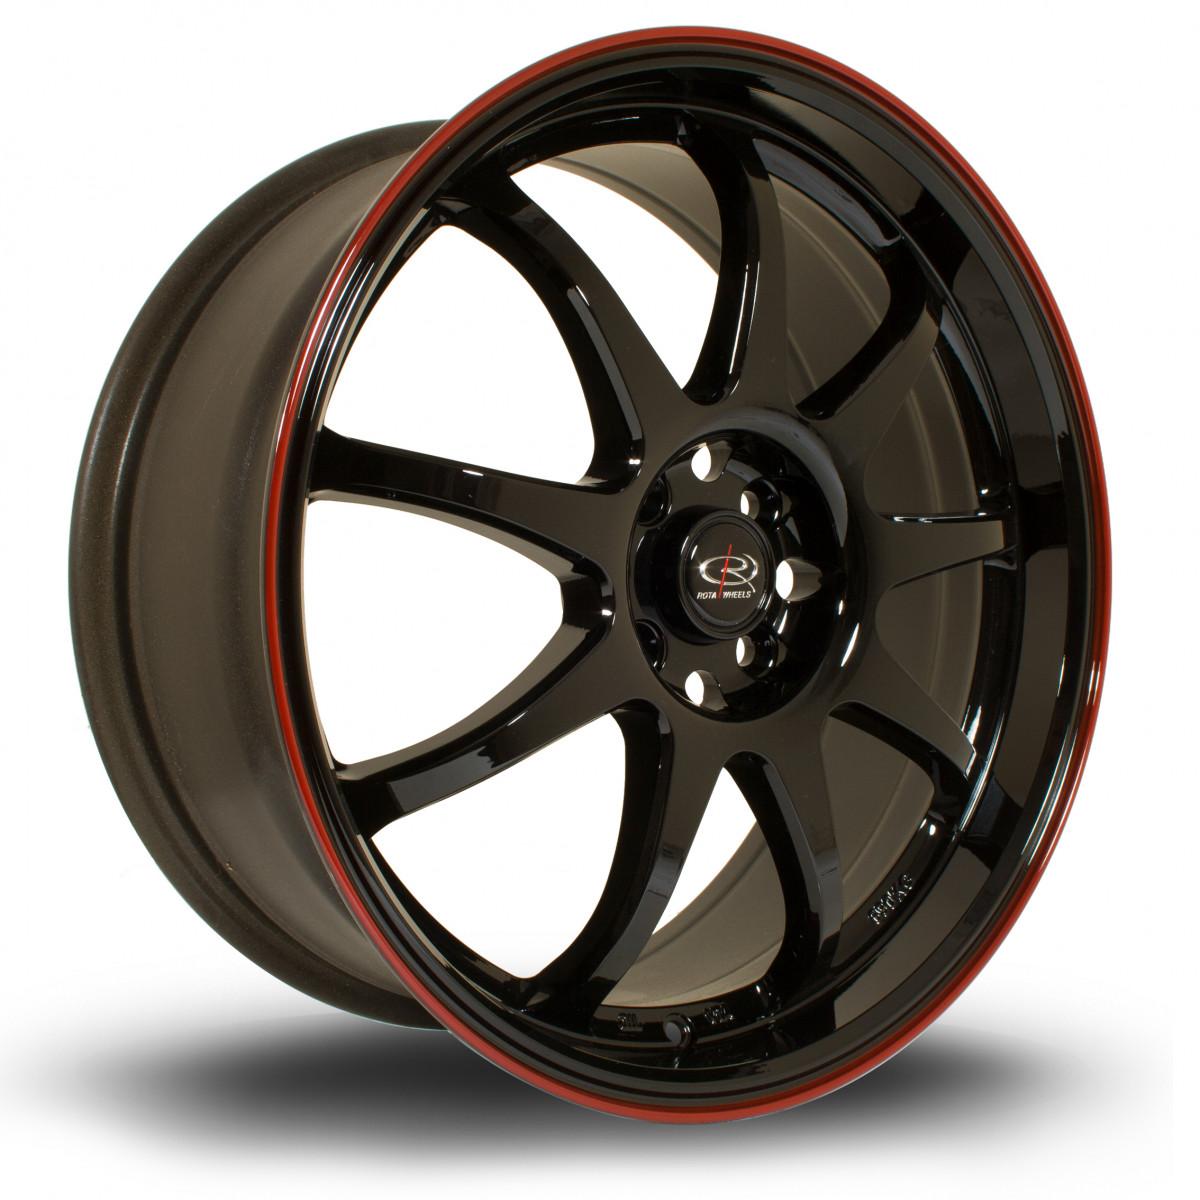 P1 18x7.5 4x100 ET45 Gloss Black with Red Lip